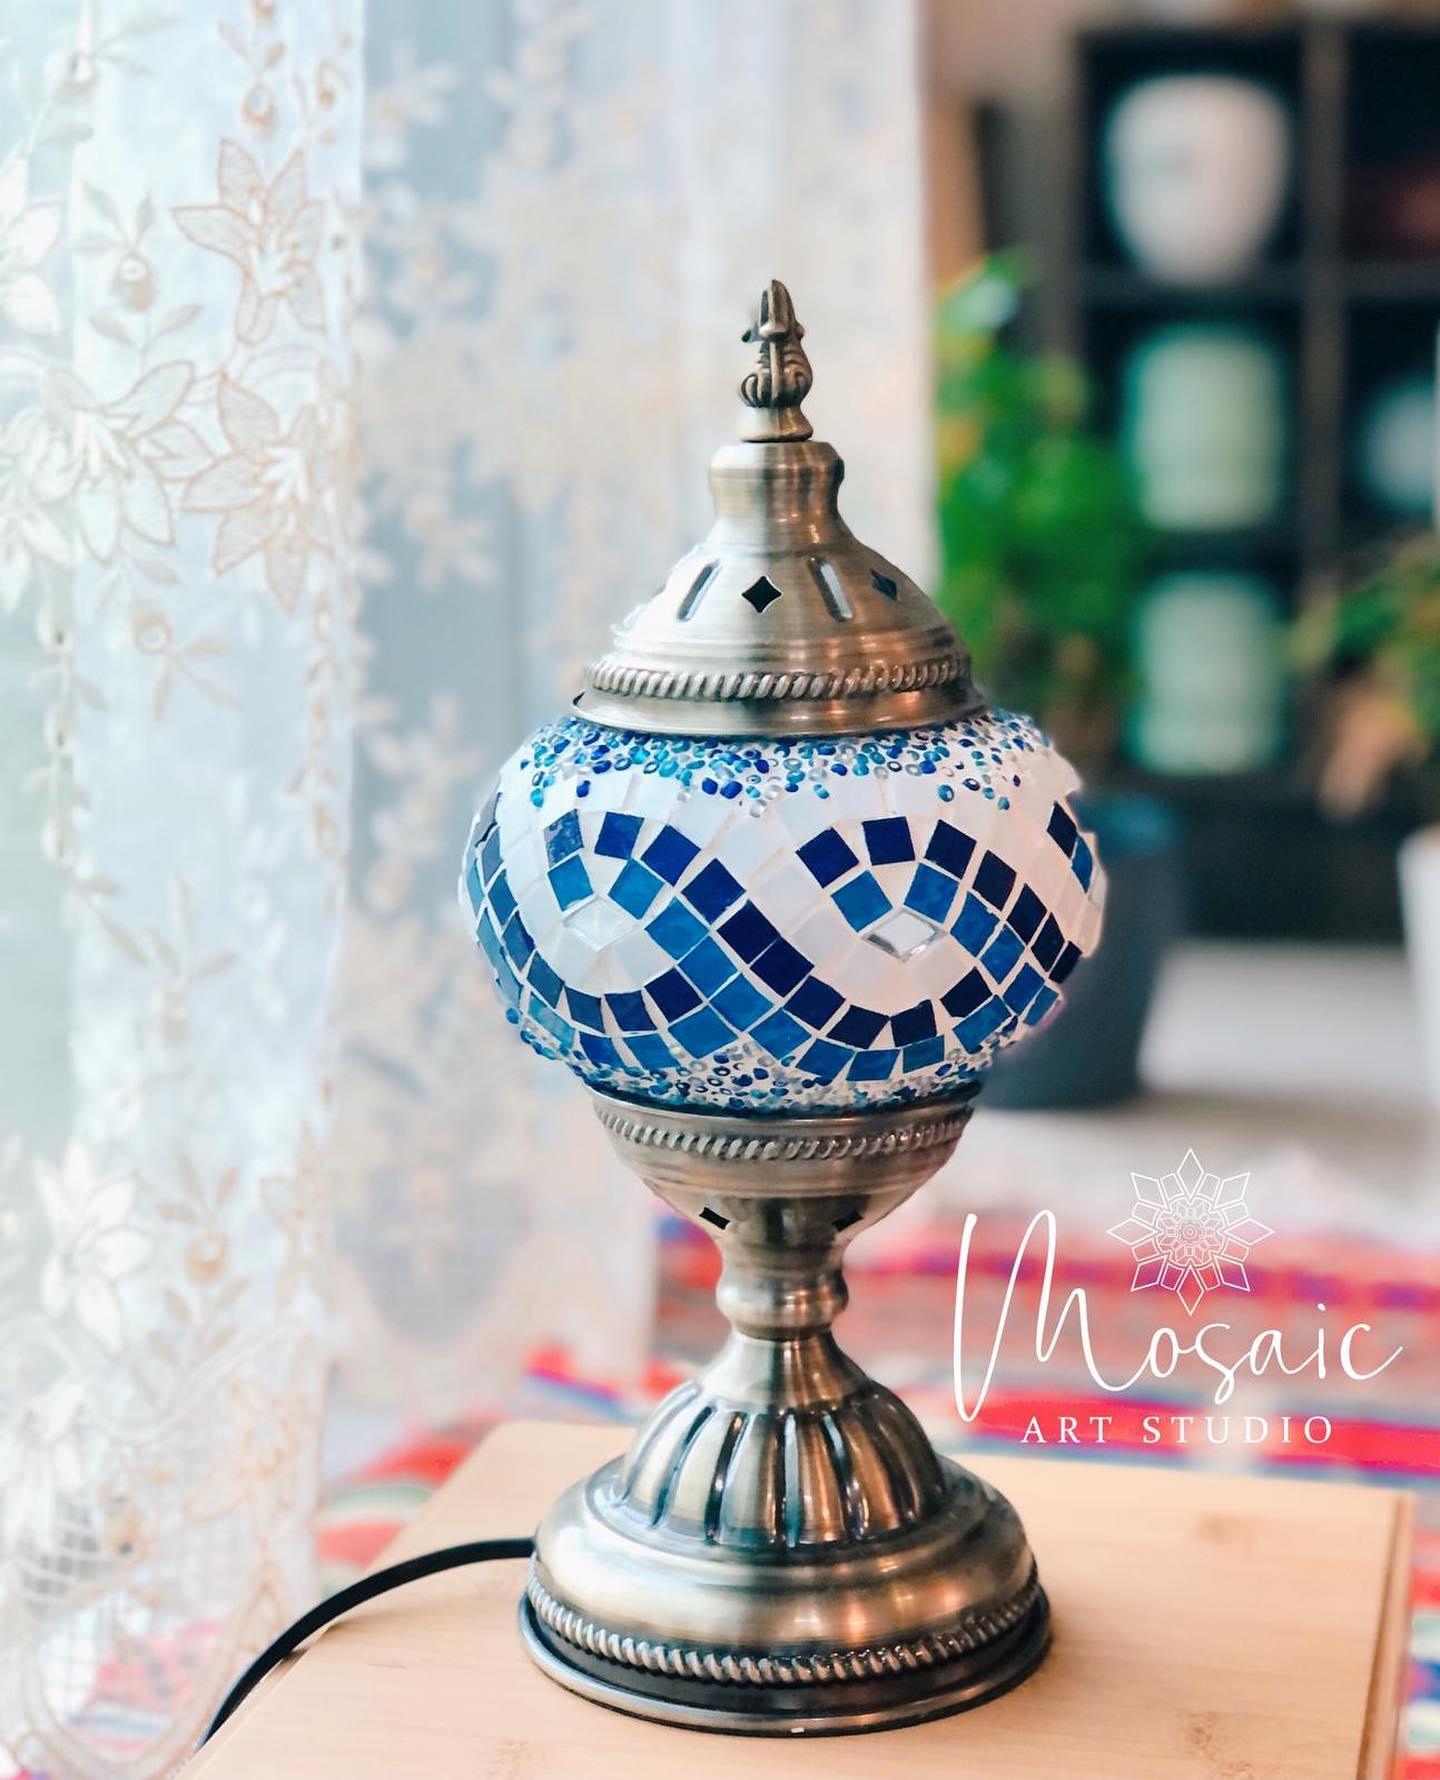 Ocean breeze never felt so real right on your desk with Turkish Mosaic Lamp! - Mosaic Art Studio US